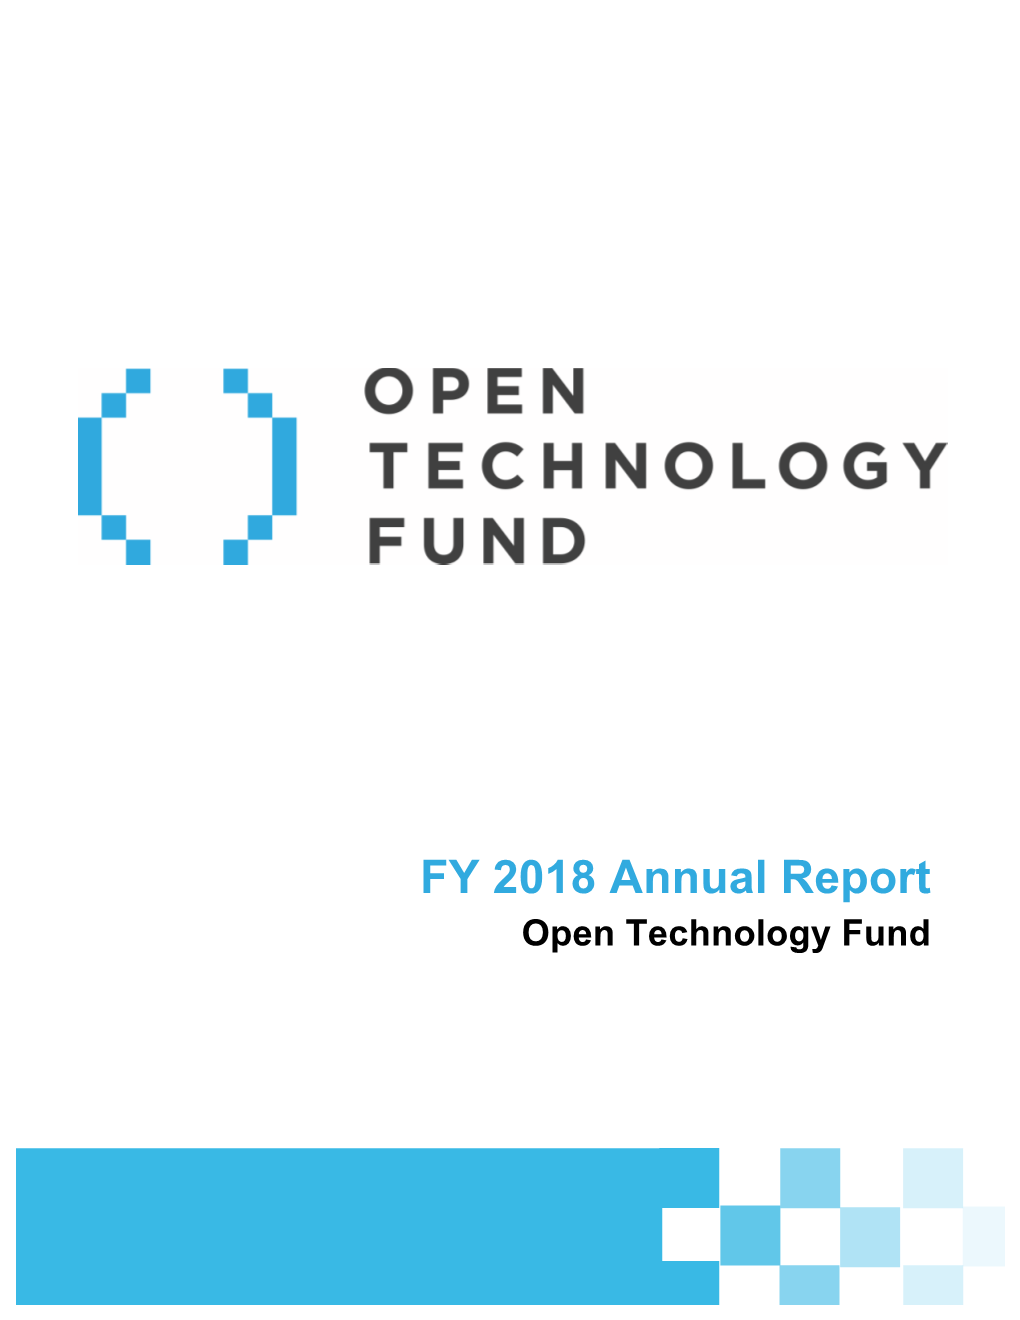 FY 2018 Annual Report Open Technology Fund